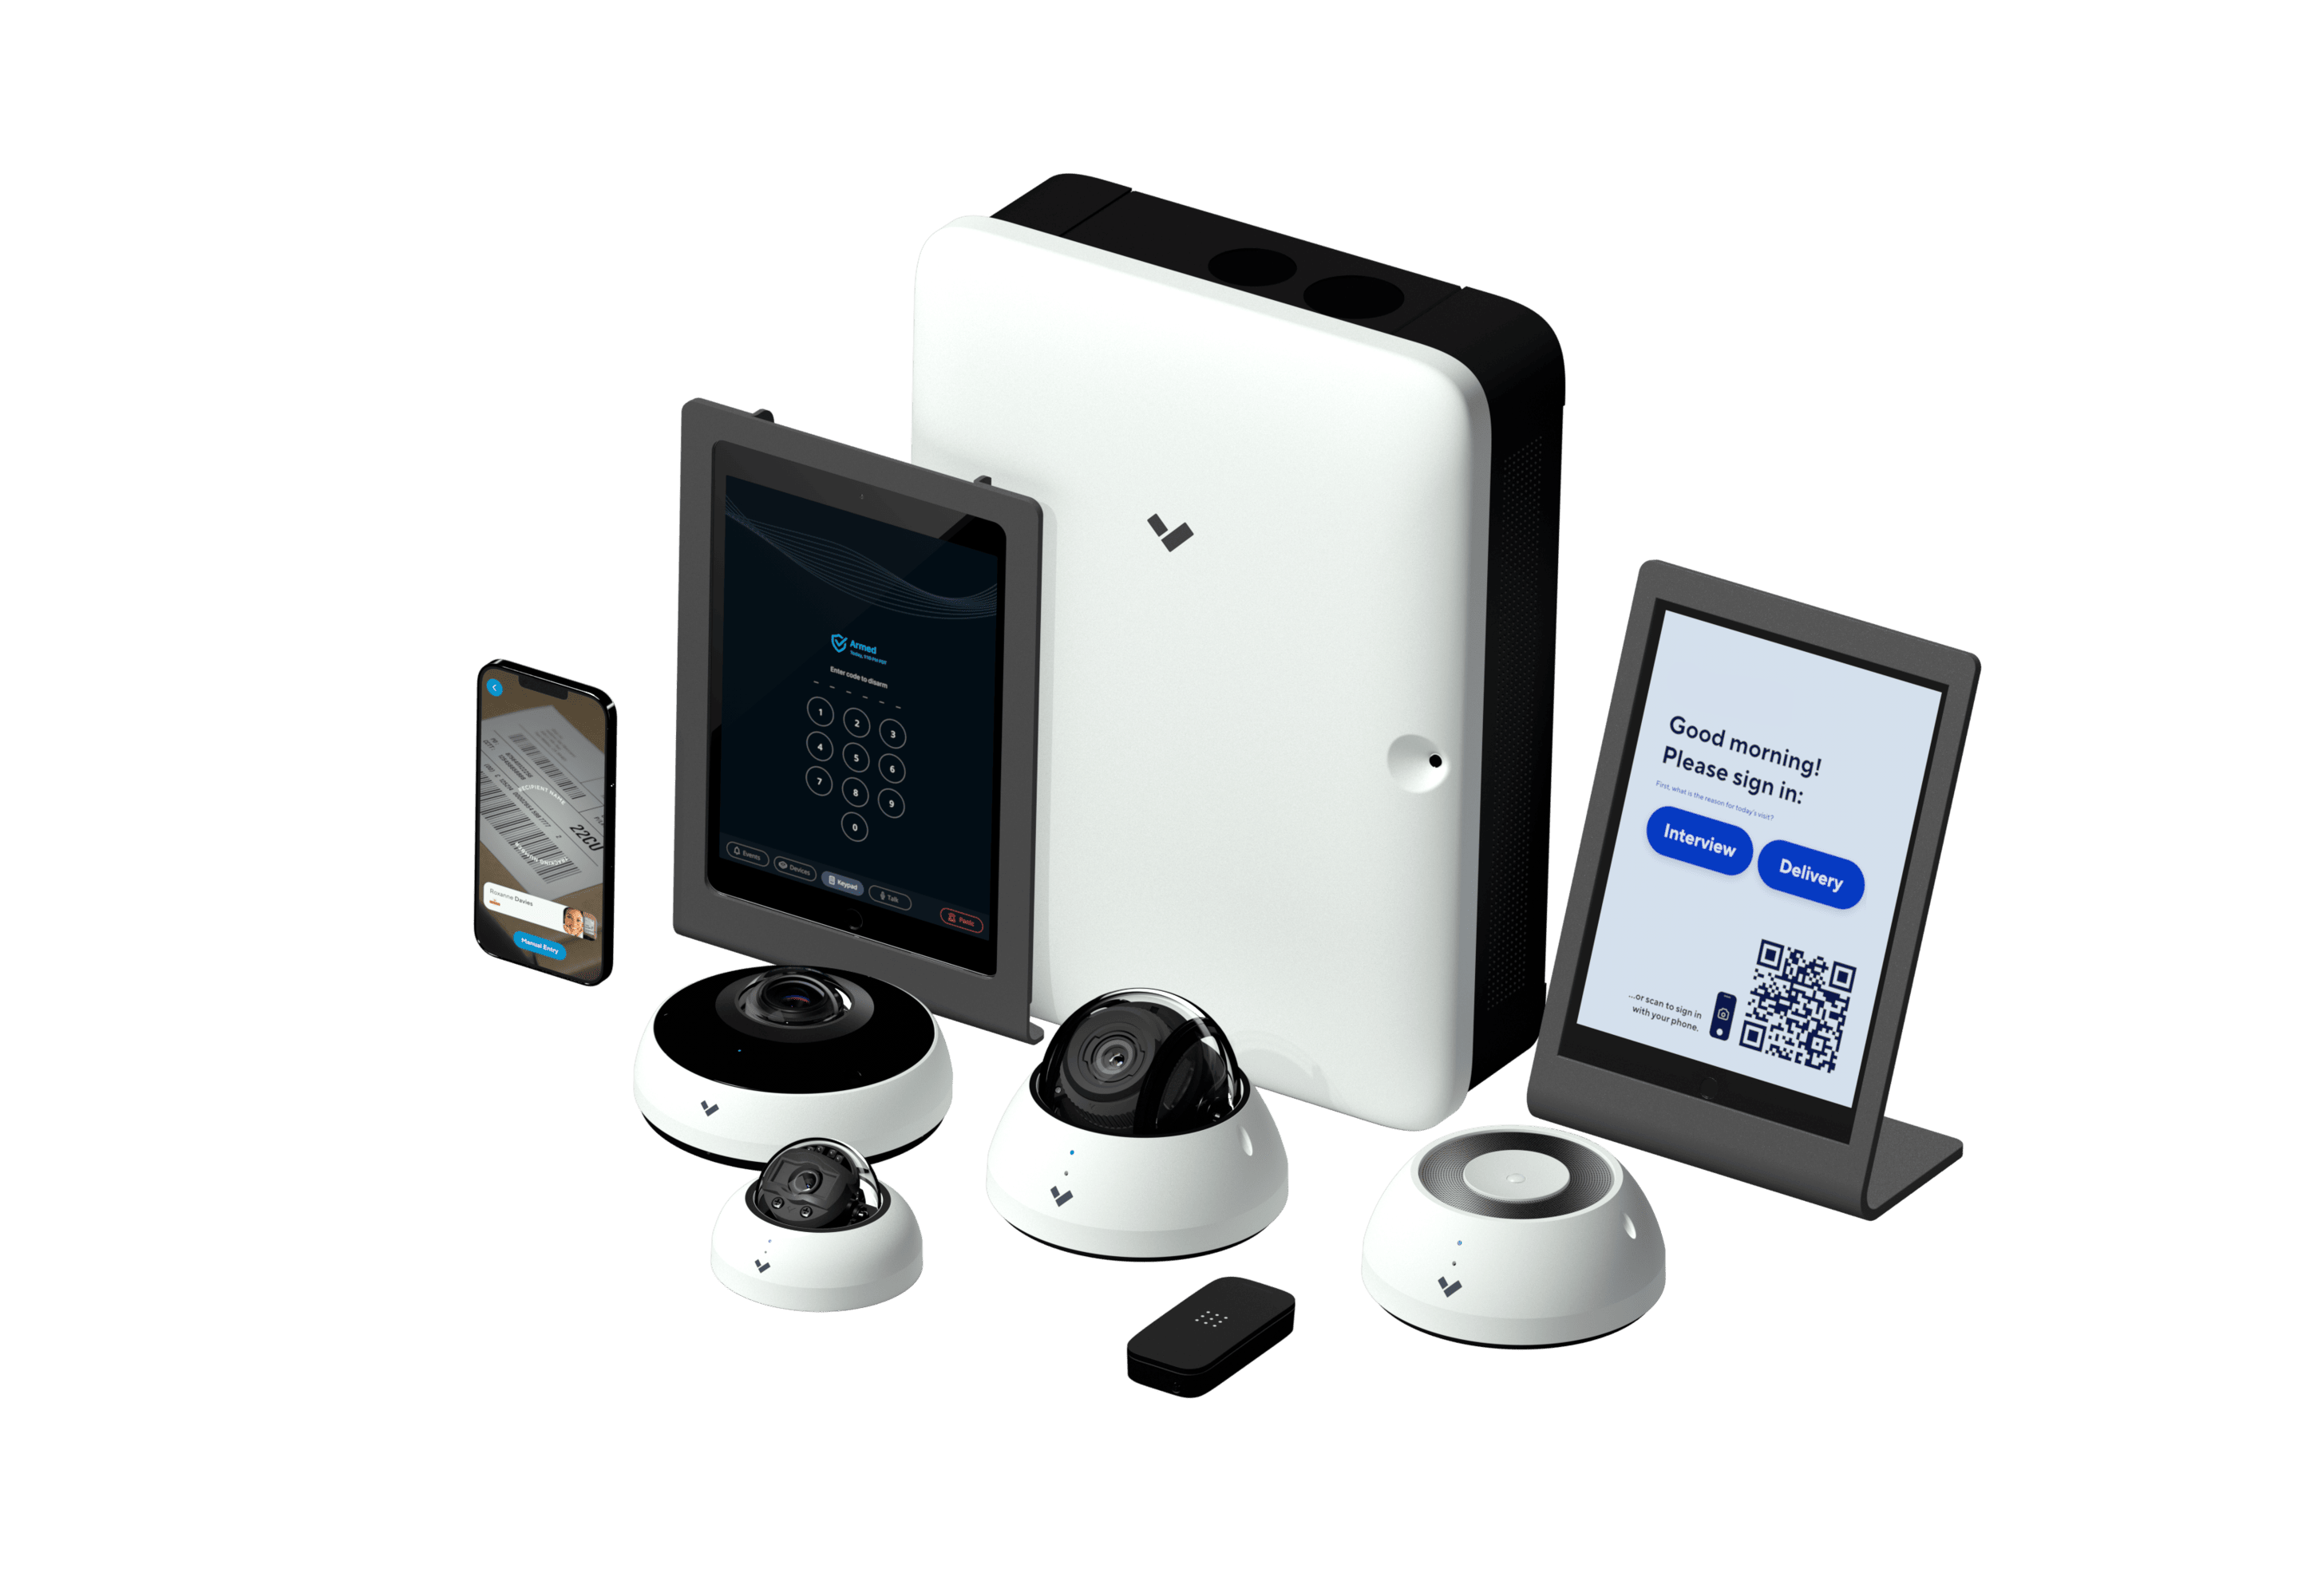 Verkada device family for security camera systems in Rockford, IL